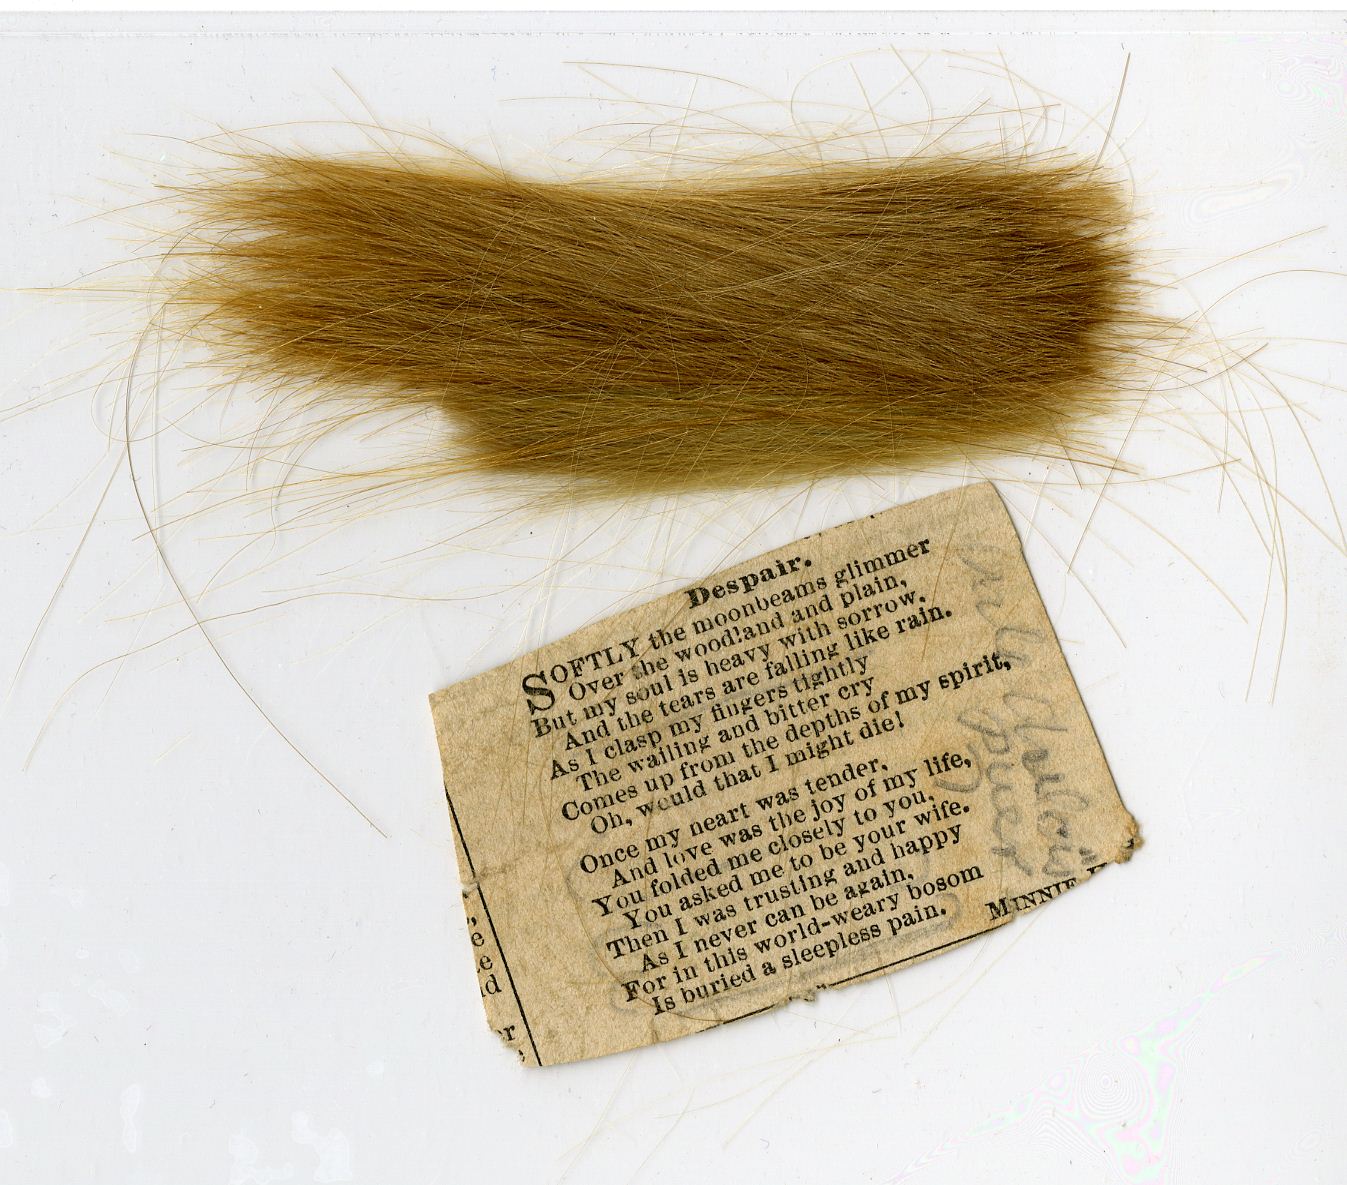 The poem accompanying a lock of hair in the Bear Papers seems to have been written from the point of view of a woman mourning the loss of her fianc. 